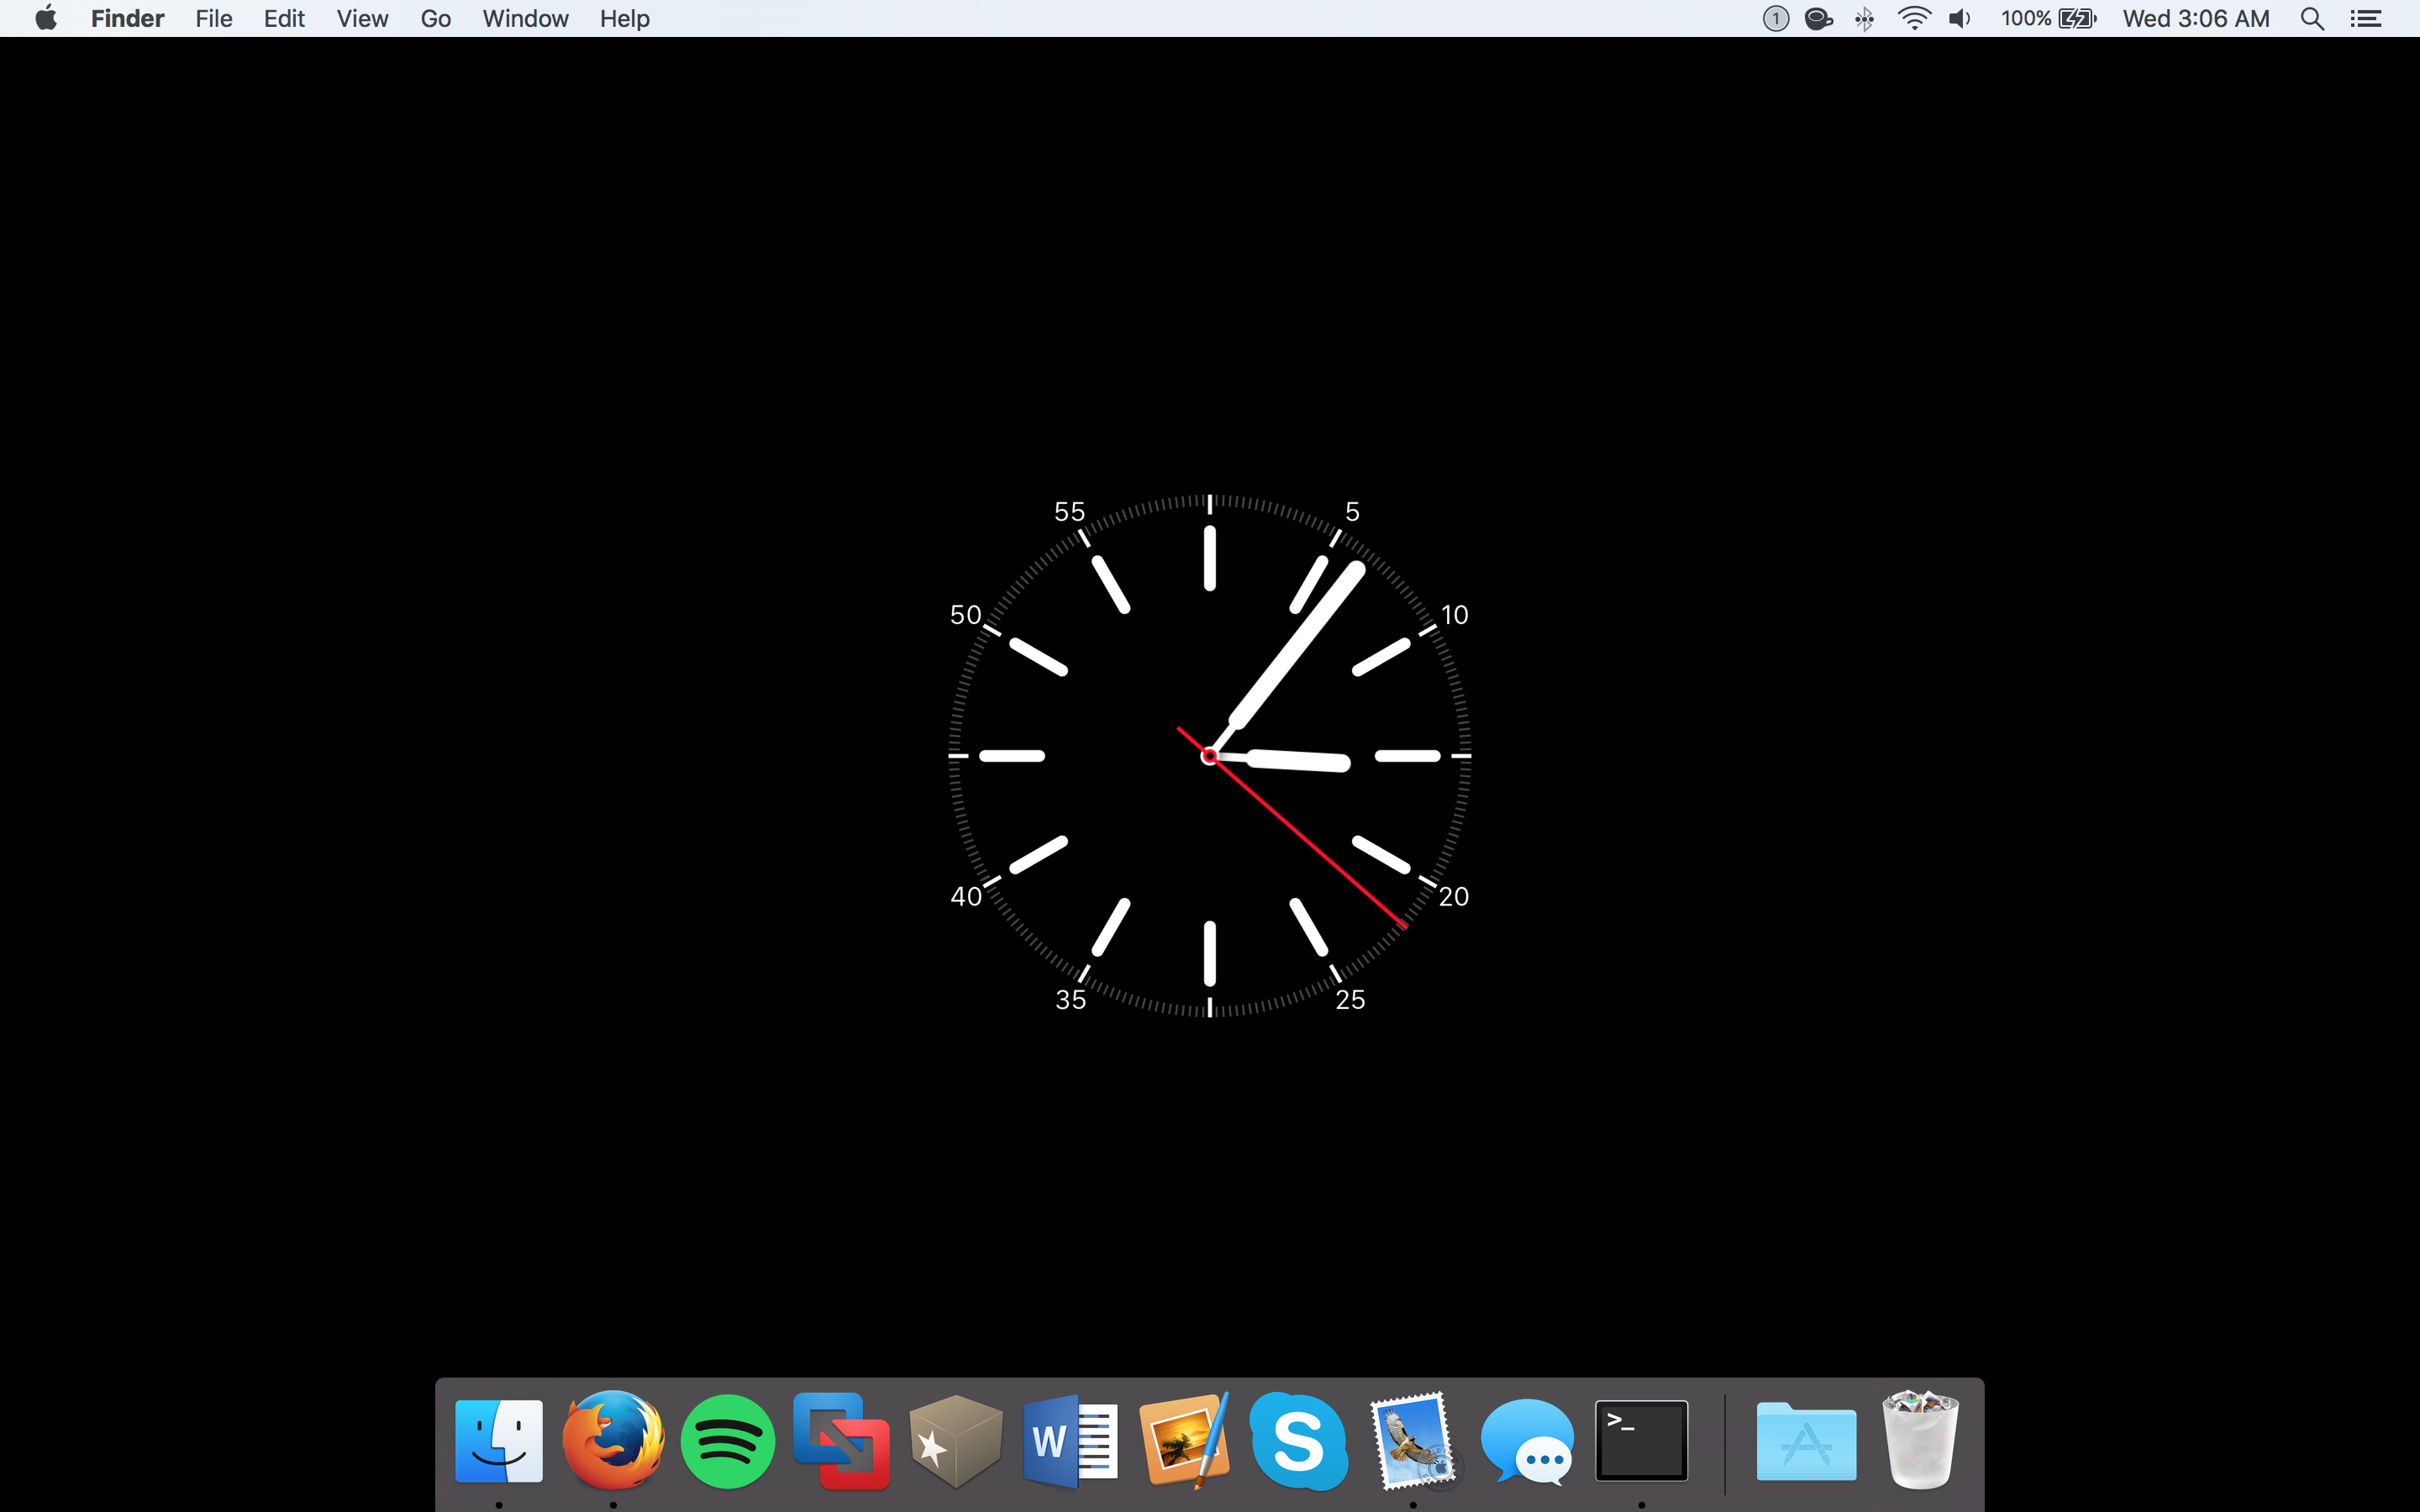 How To Set Your Mac Screensaver As The Wallpaper With This